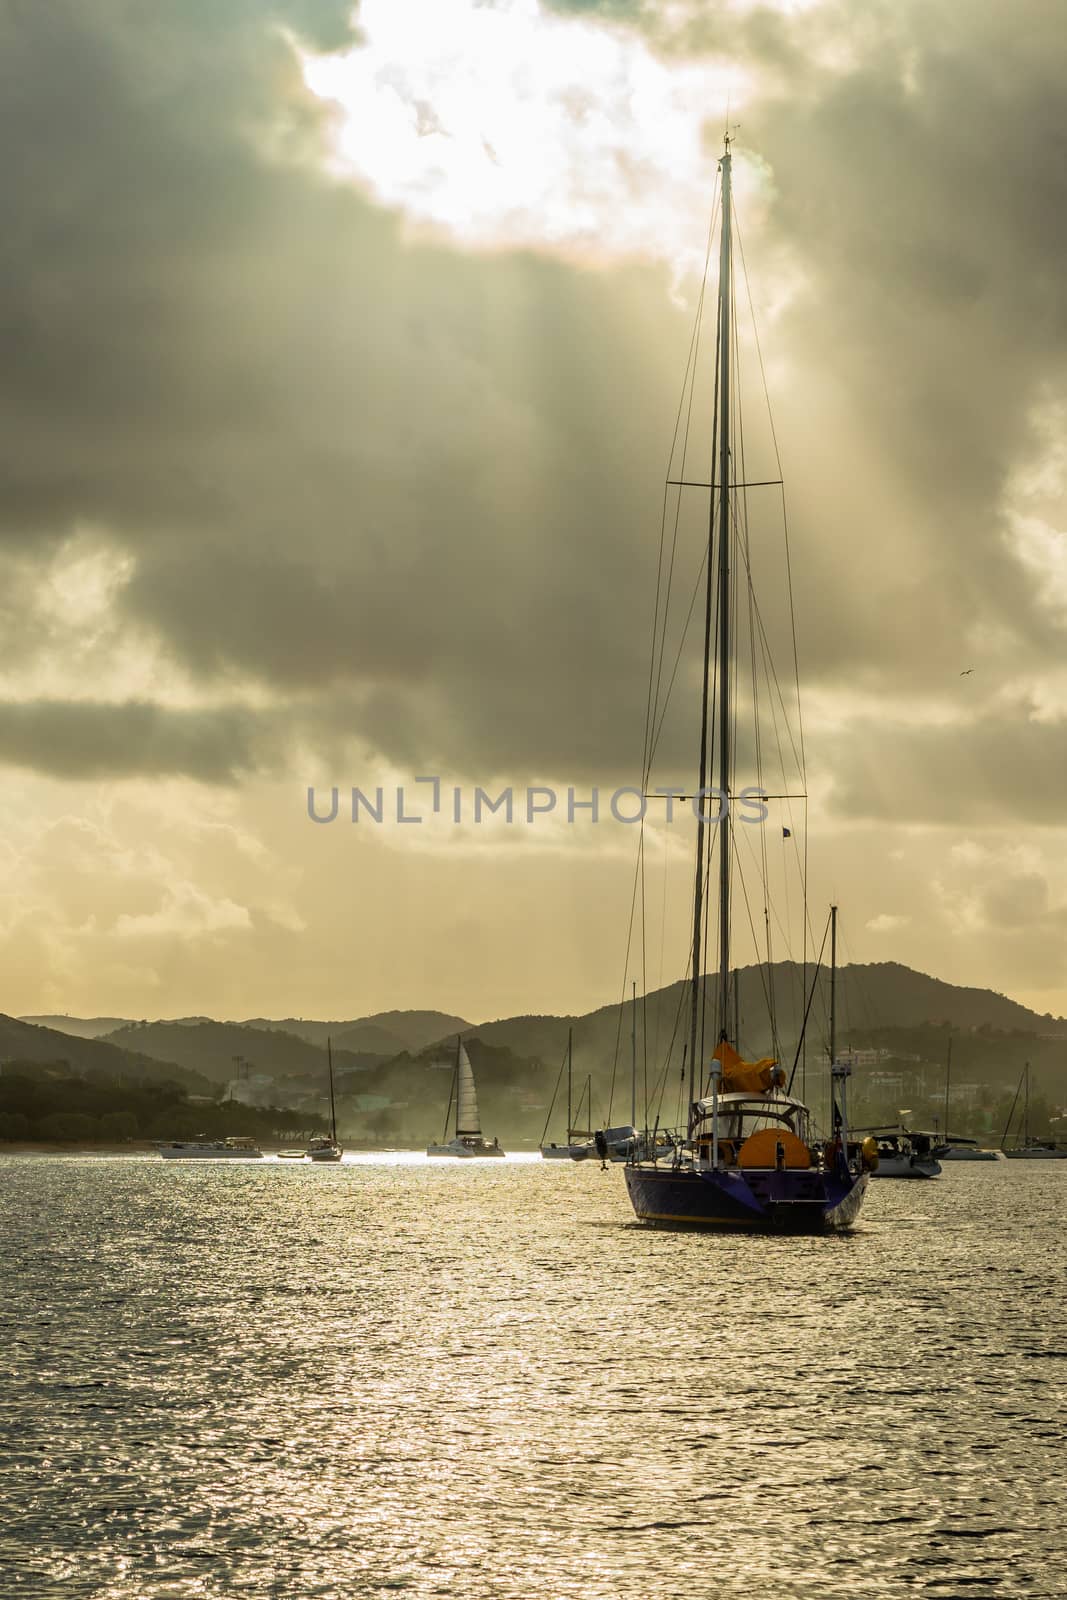 Sunset view of Rodney bay with yachts anchored in the lagoon, Saint Lucia, Caribbean sea